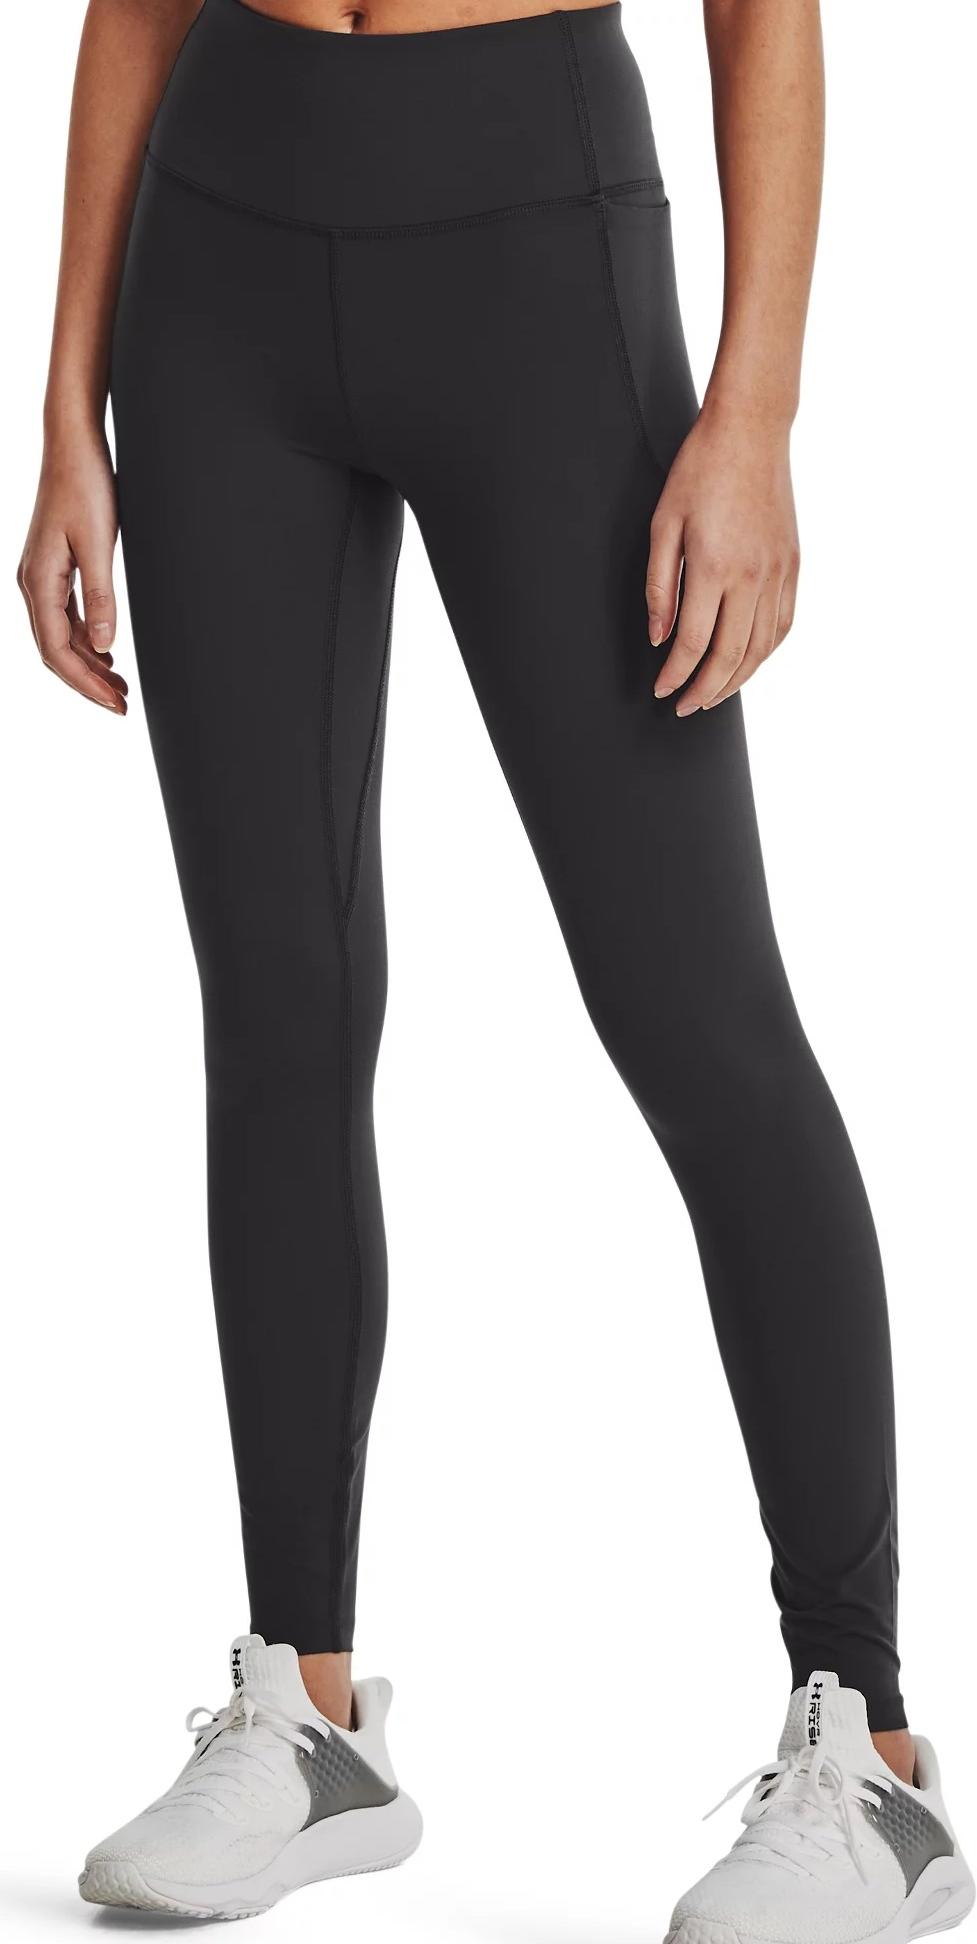 https://i1.t4s.cz/products/1355916-010/under-armour-meridian-legging-gry-434267-1355916-010.jpg